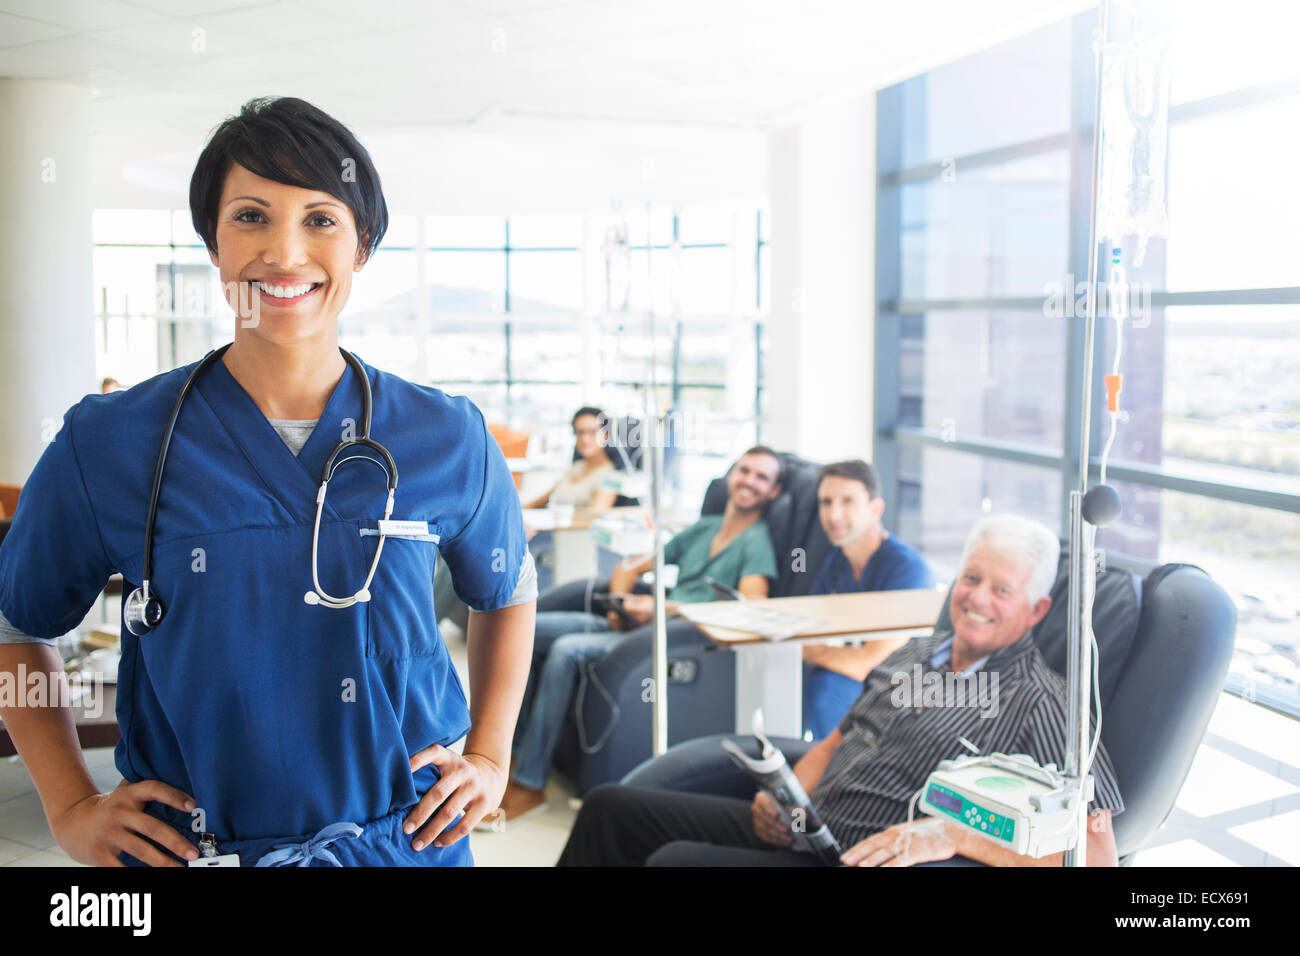 Portrait of doctor with patients receiving medical treatment in background Stock Photo